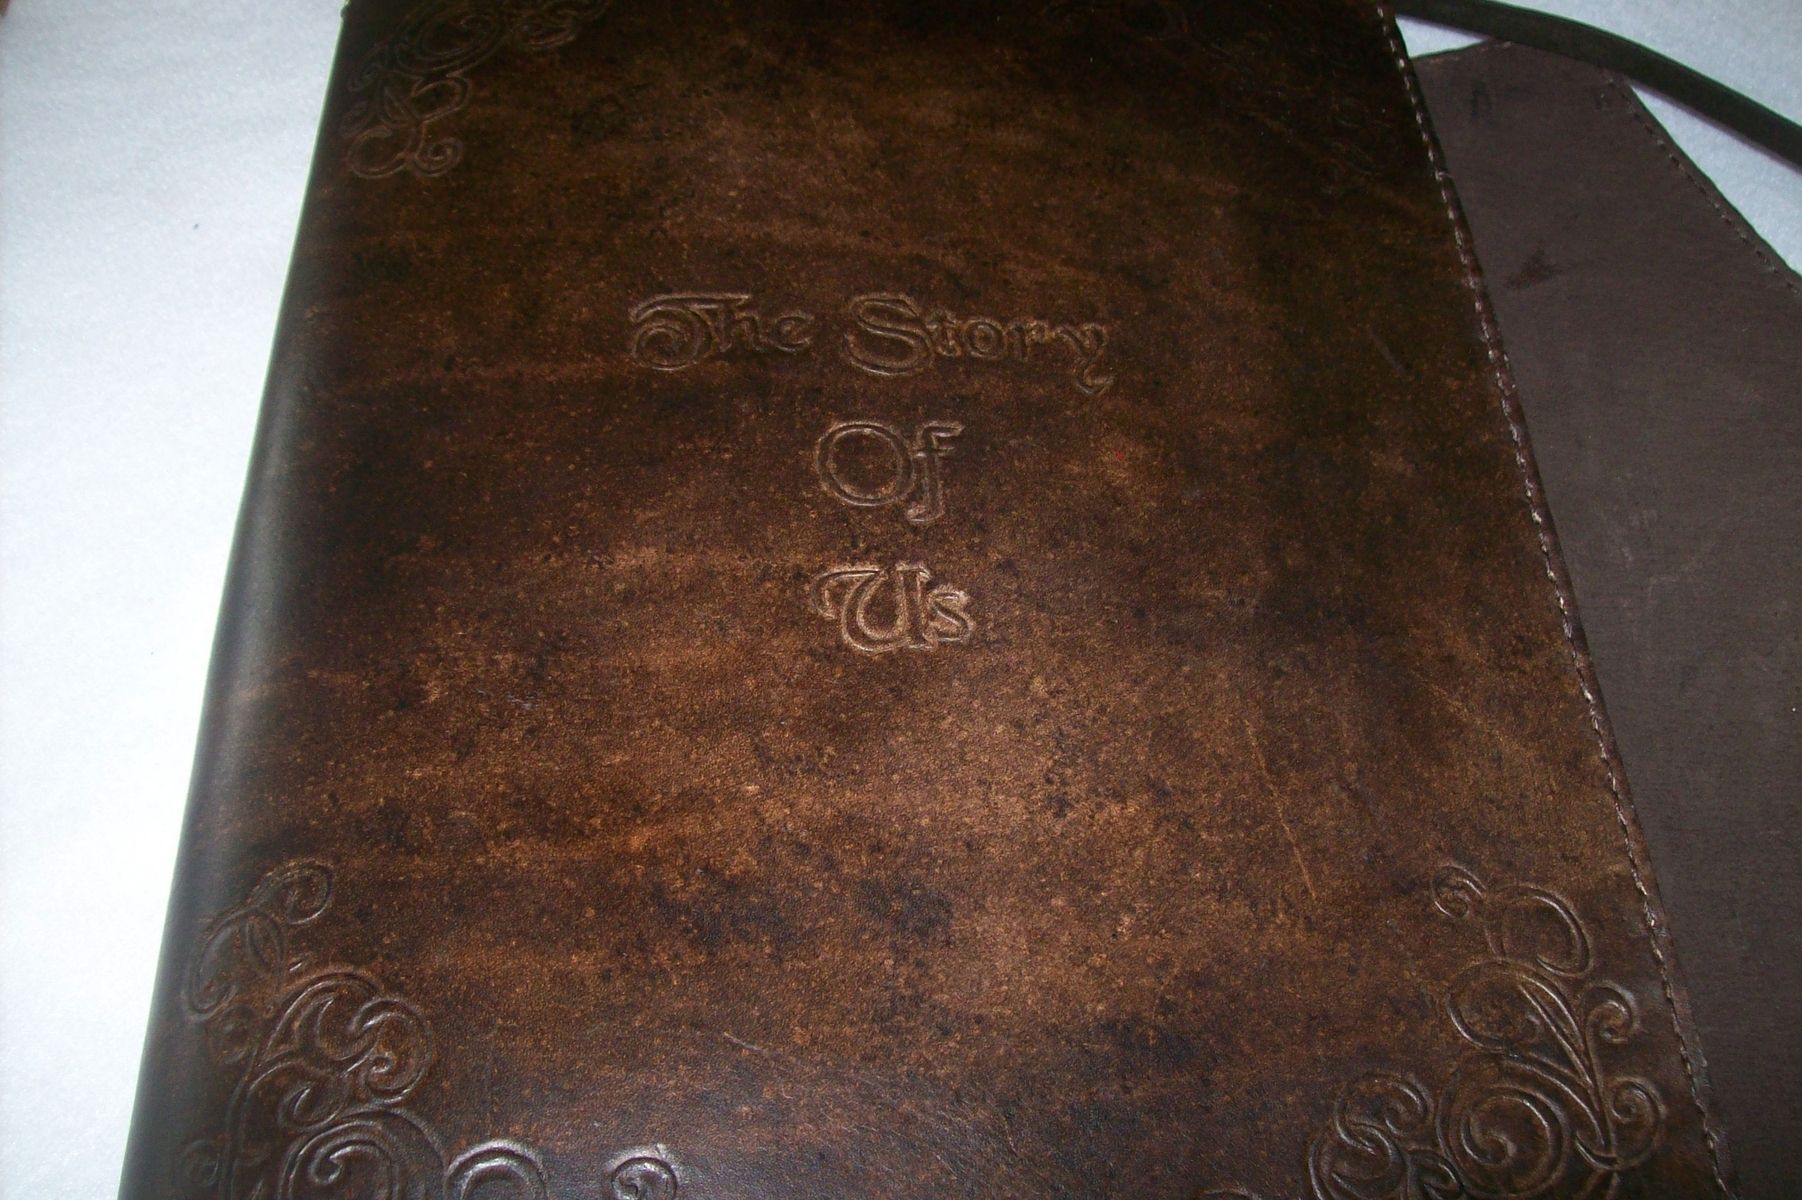 Buy Hand Crafted Custom Leather Photo Album/Scrapbook, made to